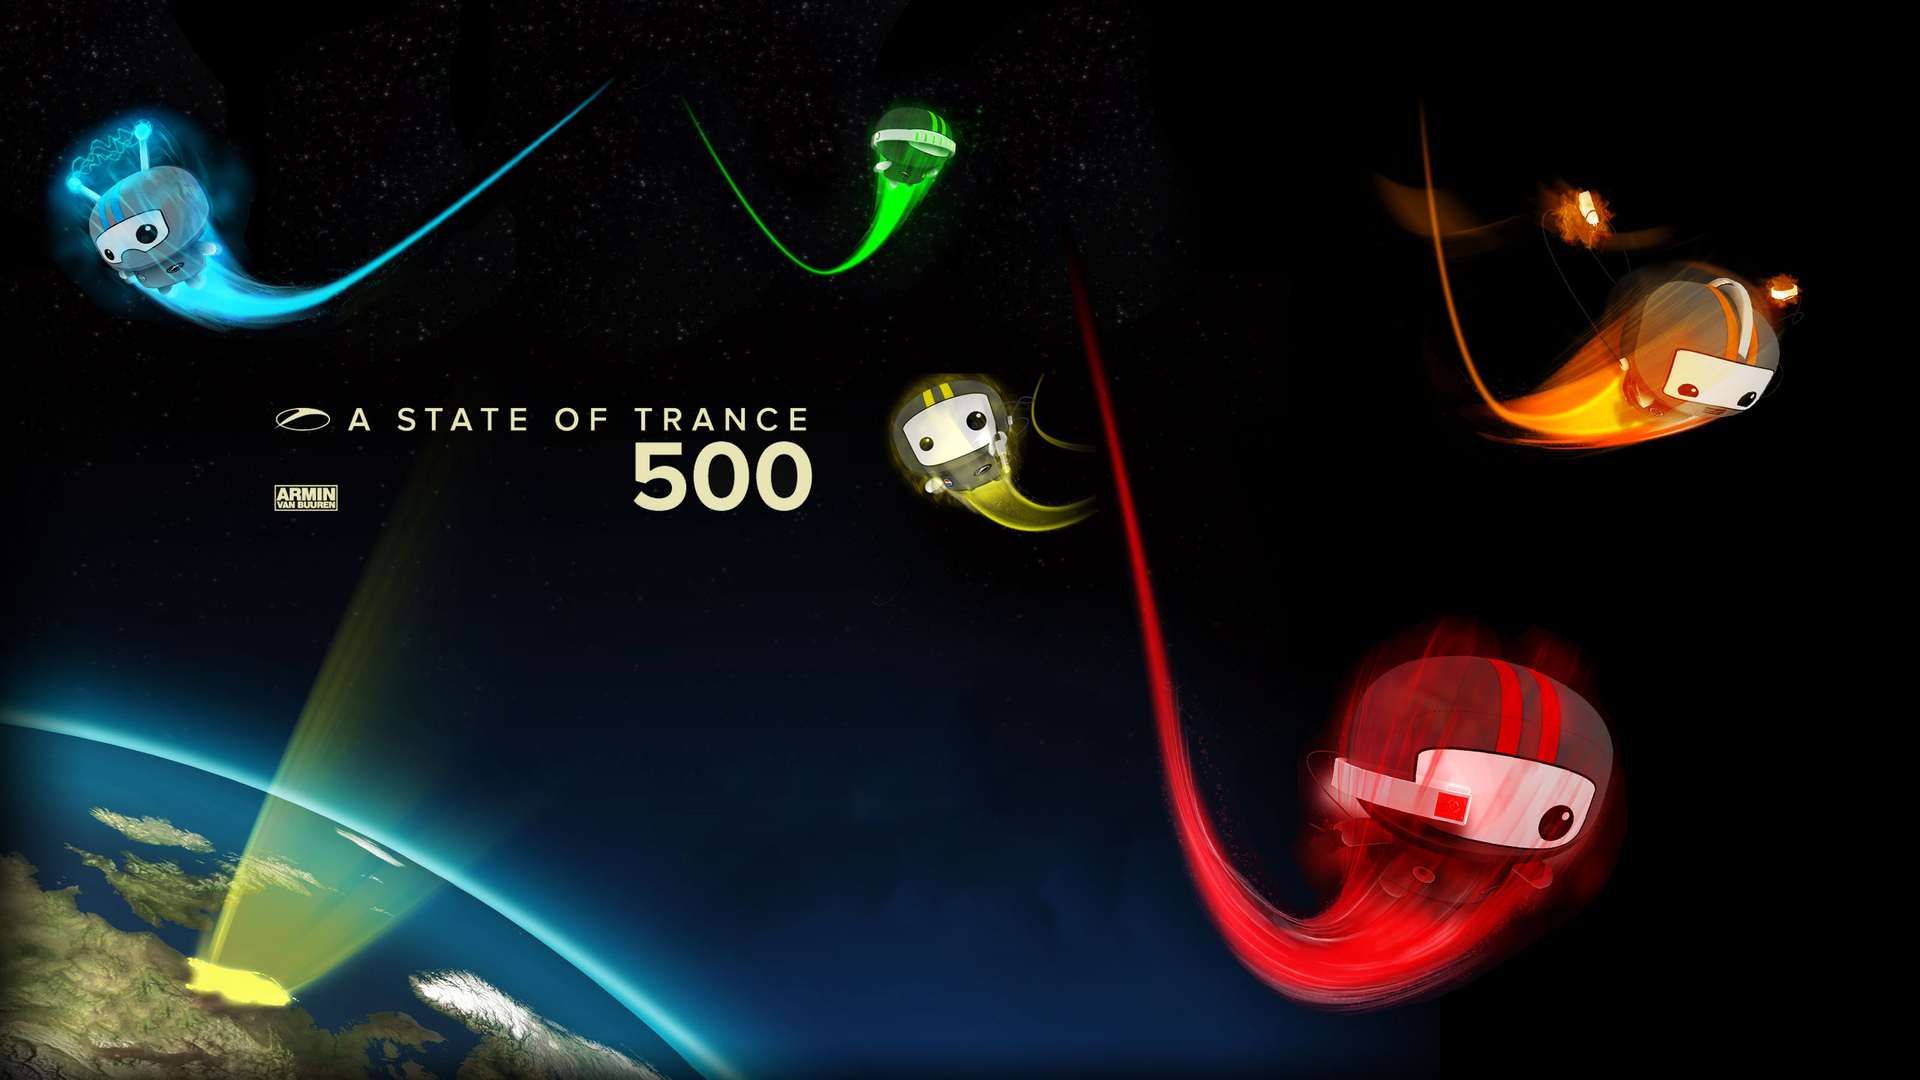 Wallpaper Of A State Of Trance 500, Armin Van Buuren - State Of Trance Wallpaper Hd - HD Wallpaper 